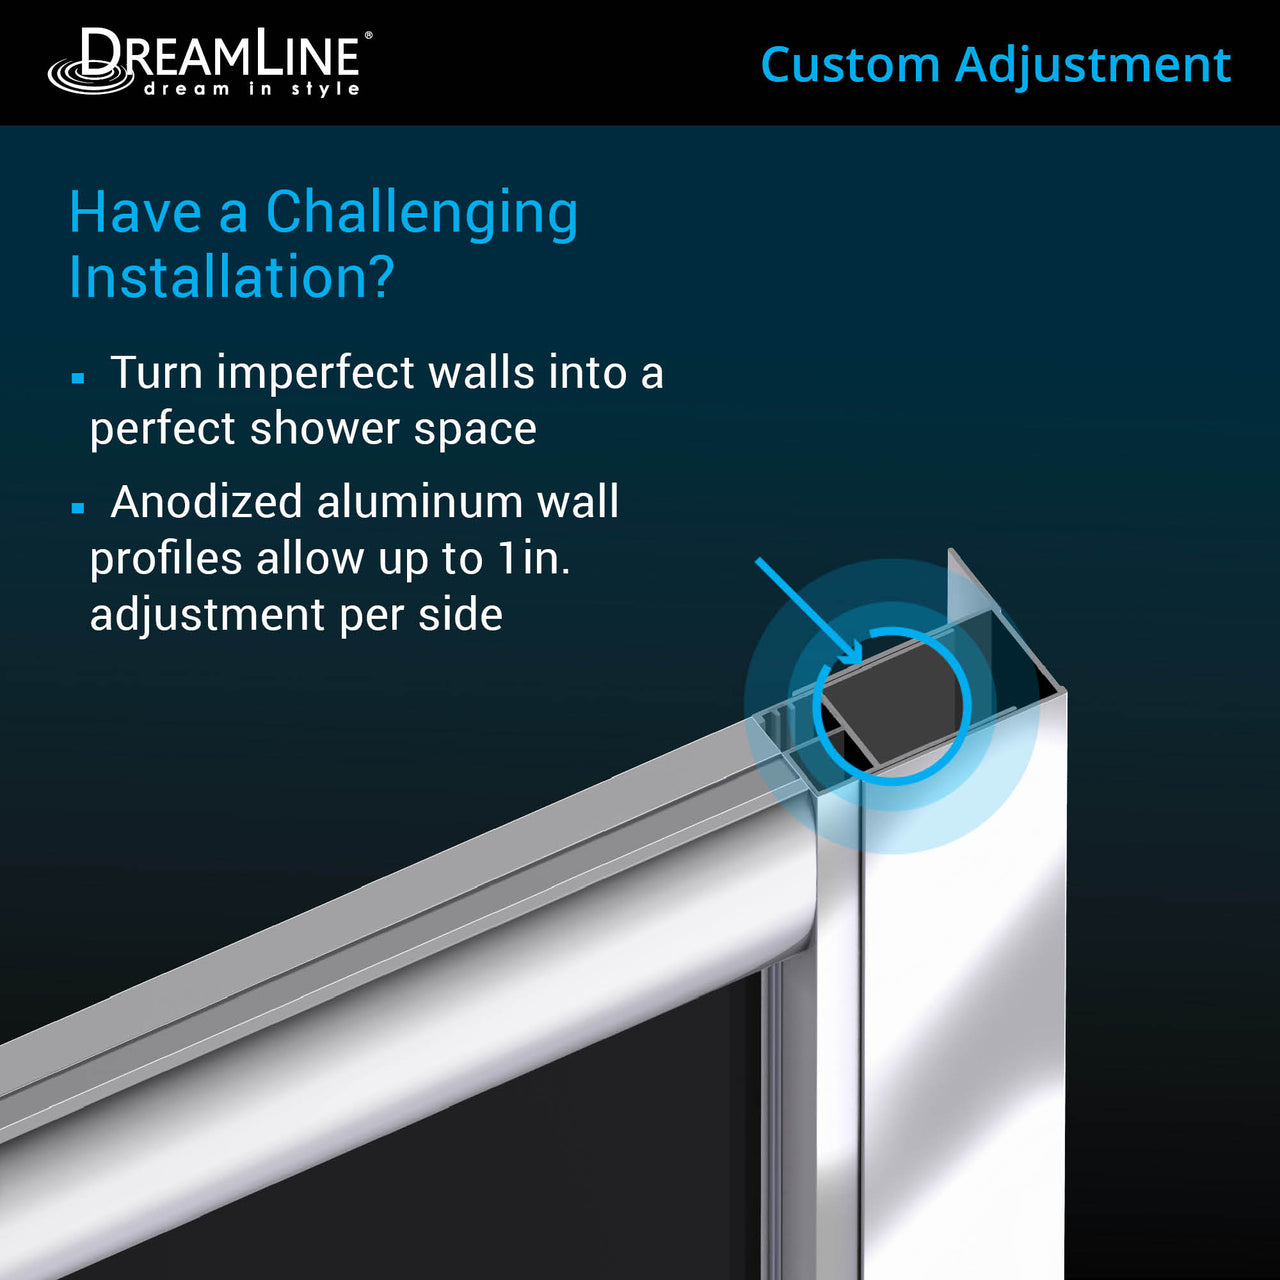 DreamLine Prime 33 in. x 33 in. x 76 3/4 in. H Sliding Shower Enclosure, Shower Base and QWALL-4 Acrylic Backwall Kit, Frosted Glass - BNGBath